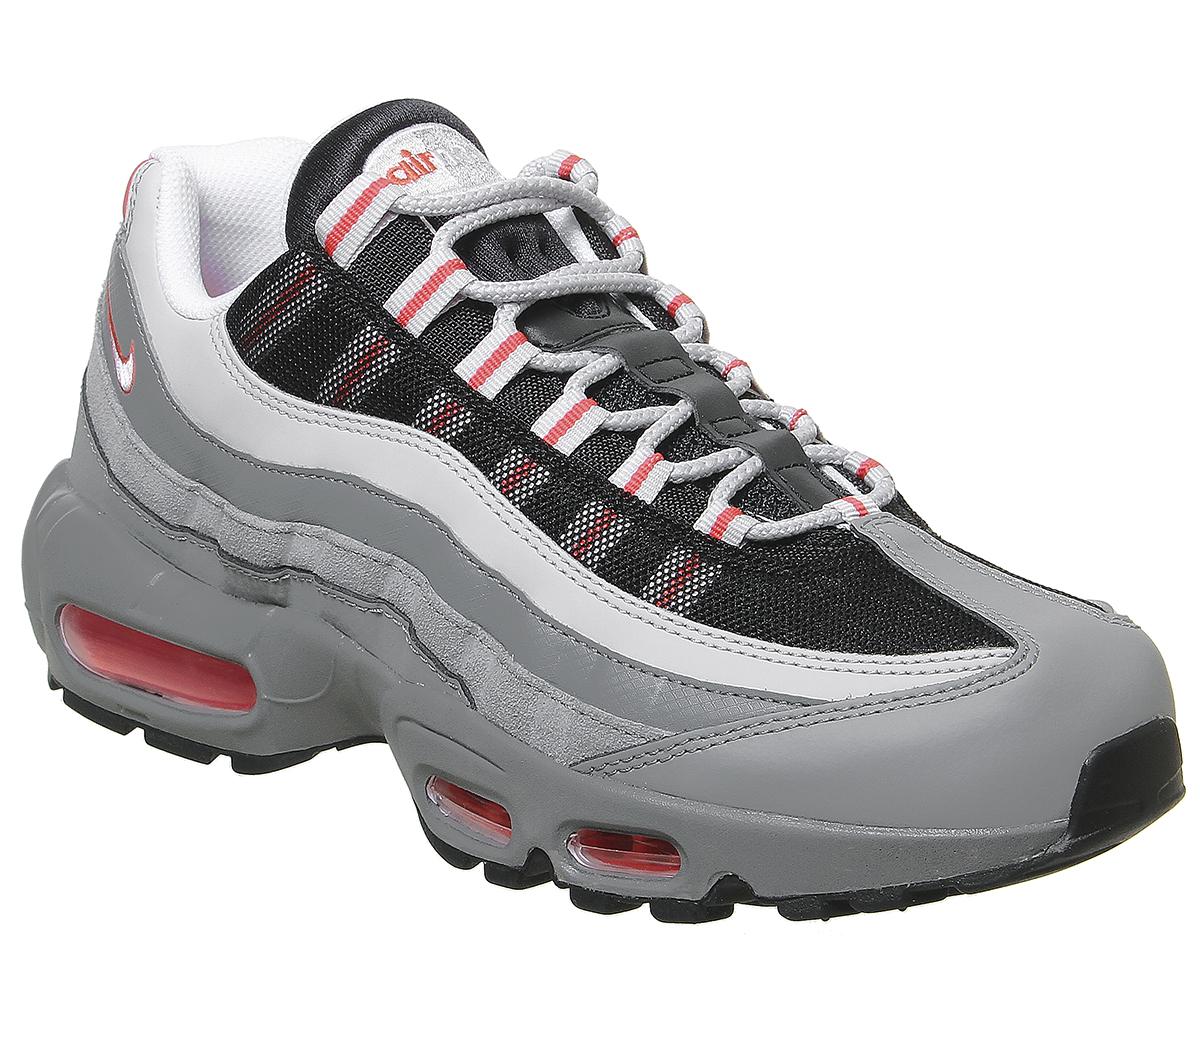 NikeAir Max 95 TrainersTrack Red White Grey Black Grey Fog Track Red